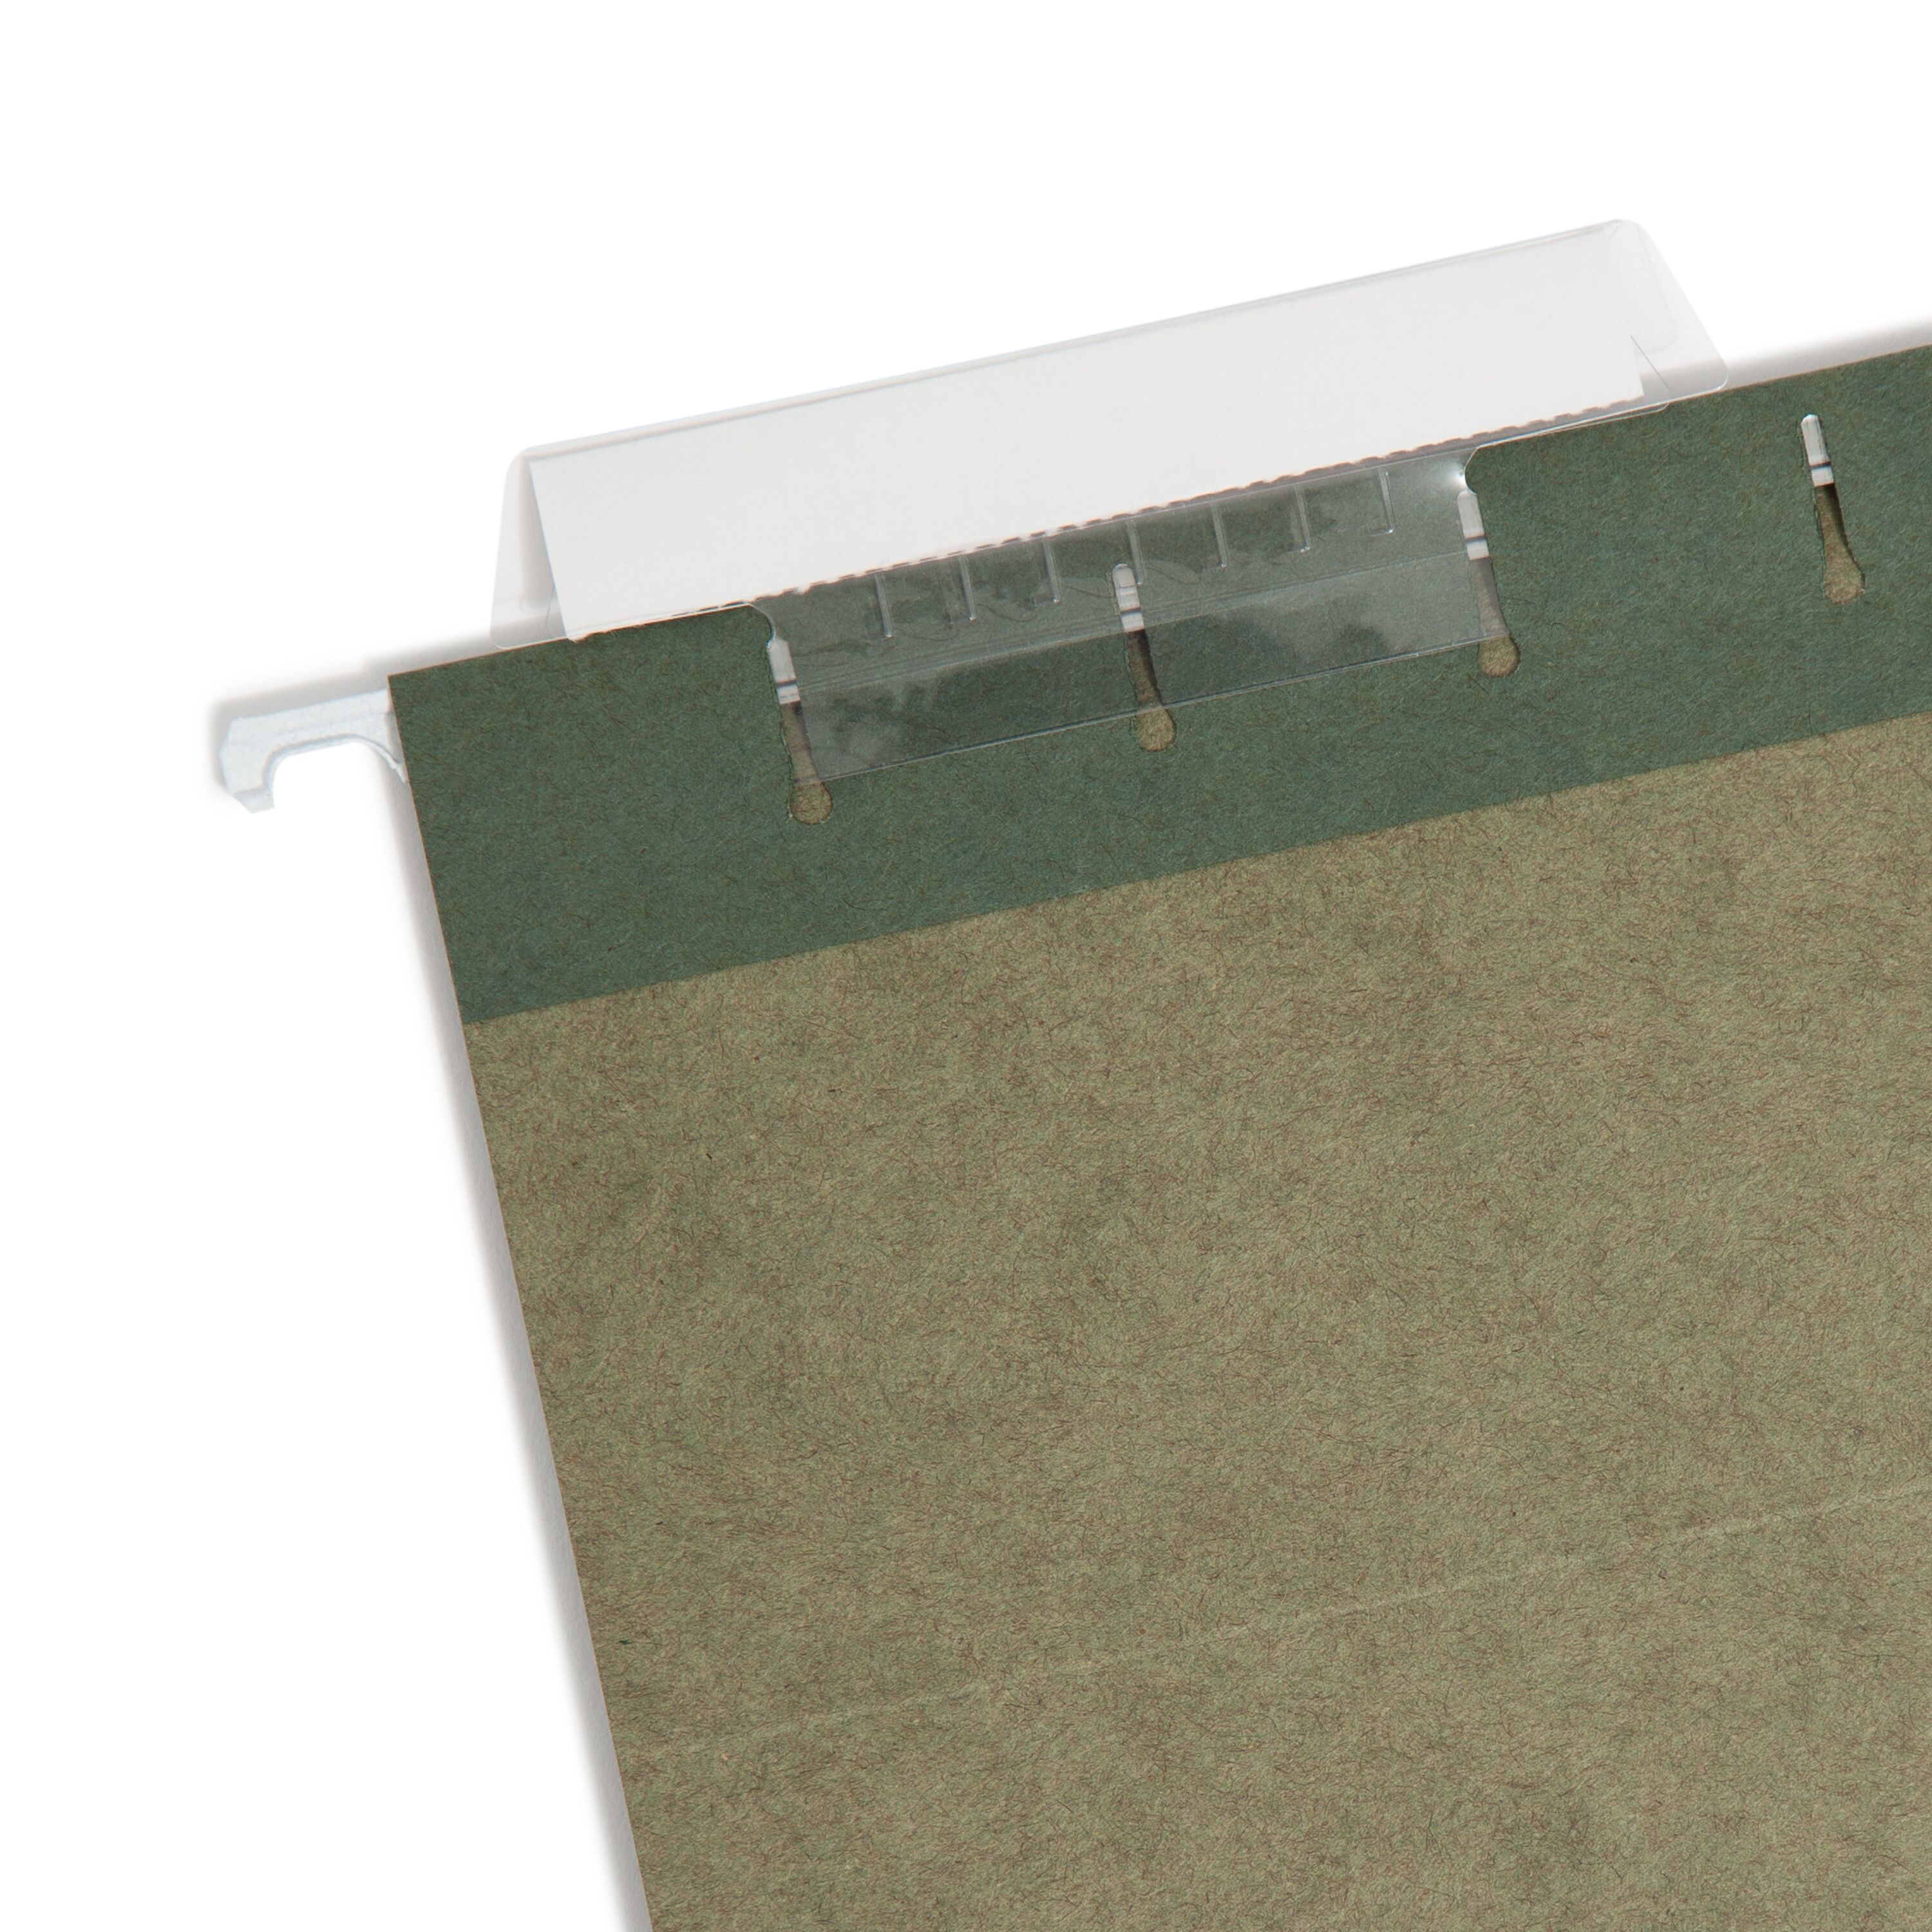 Smead Hanging File Folder with Tab, 1/3- Cut Adjustable Tab, Legal Size, Standard Green, 25 per Box (64135) - image 2 of 5